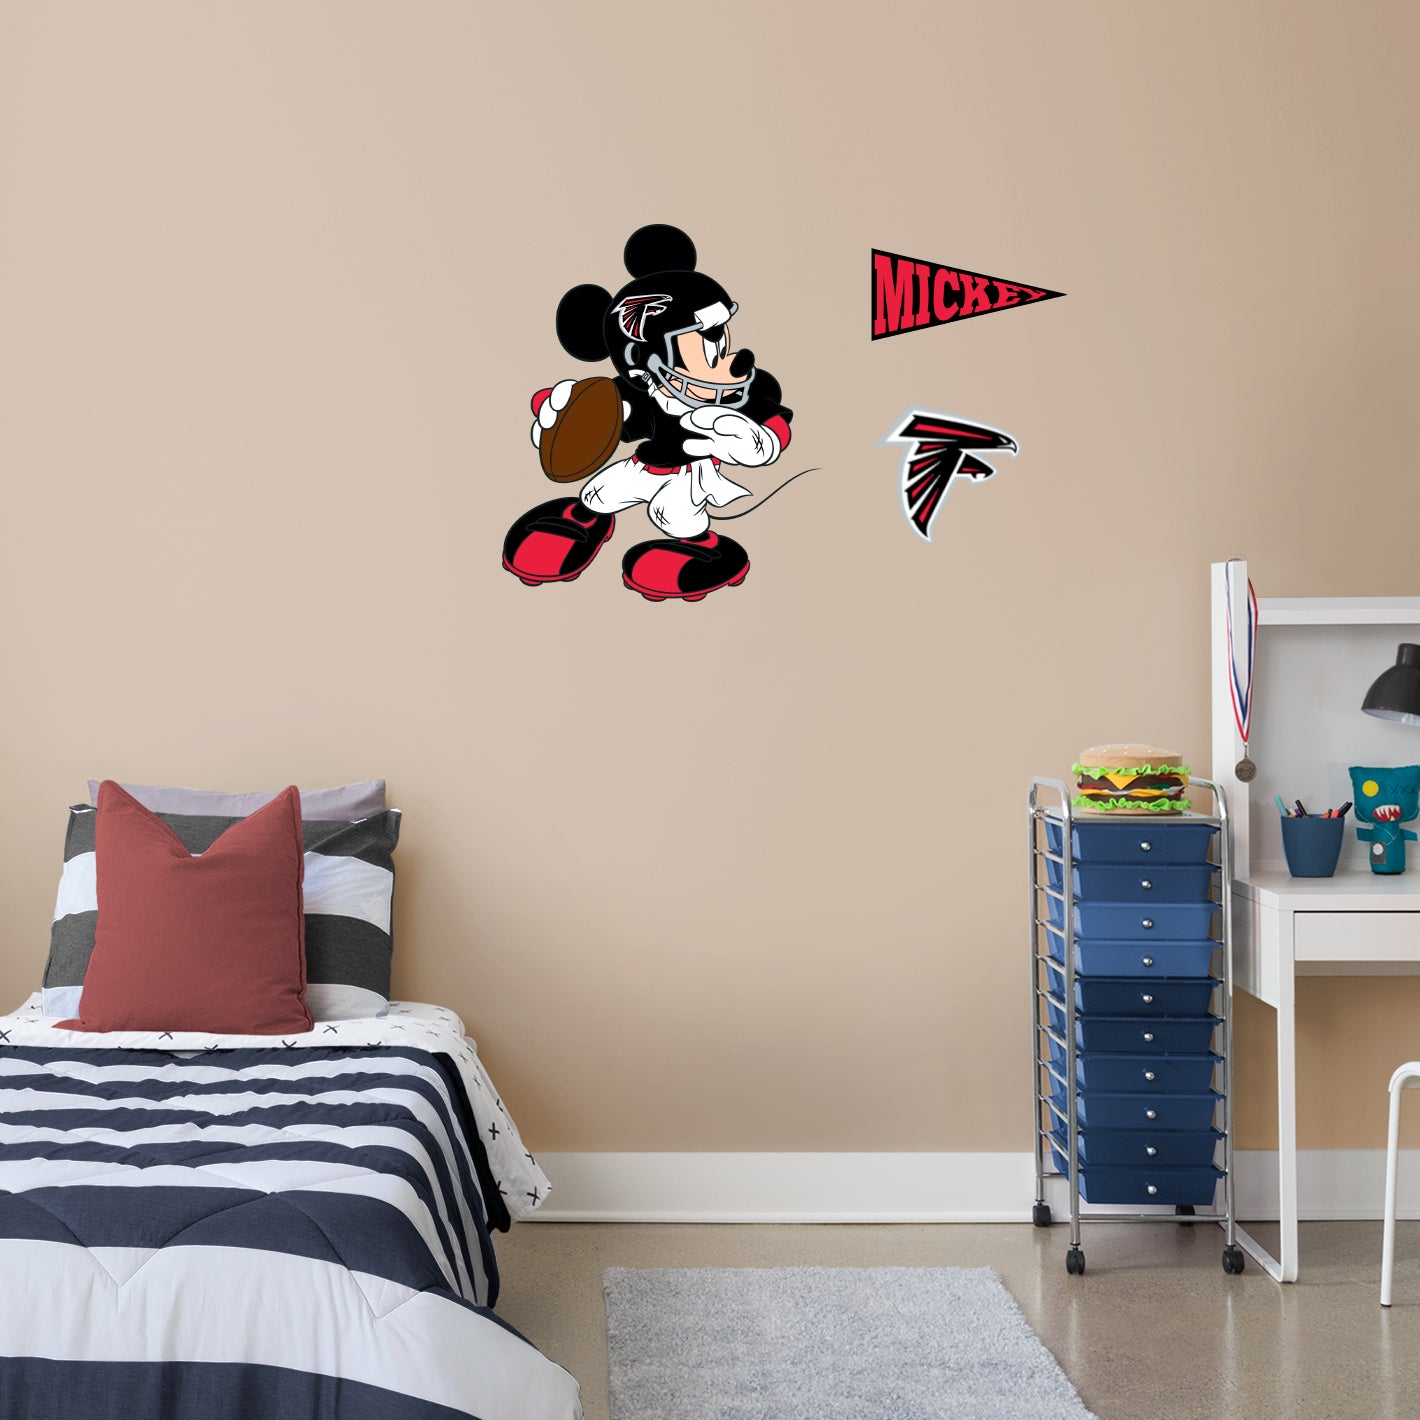 Atlanta Falcons: Mickey Mouse 2021        - Officially Licensed NFL Removable     Adhesive Decal